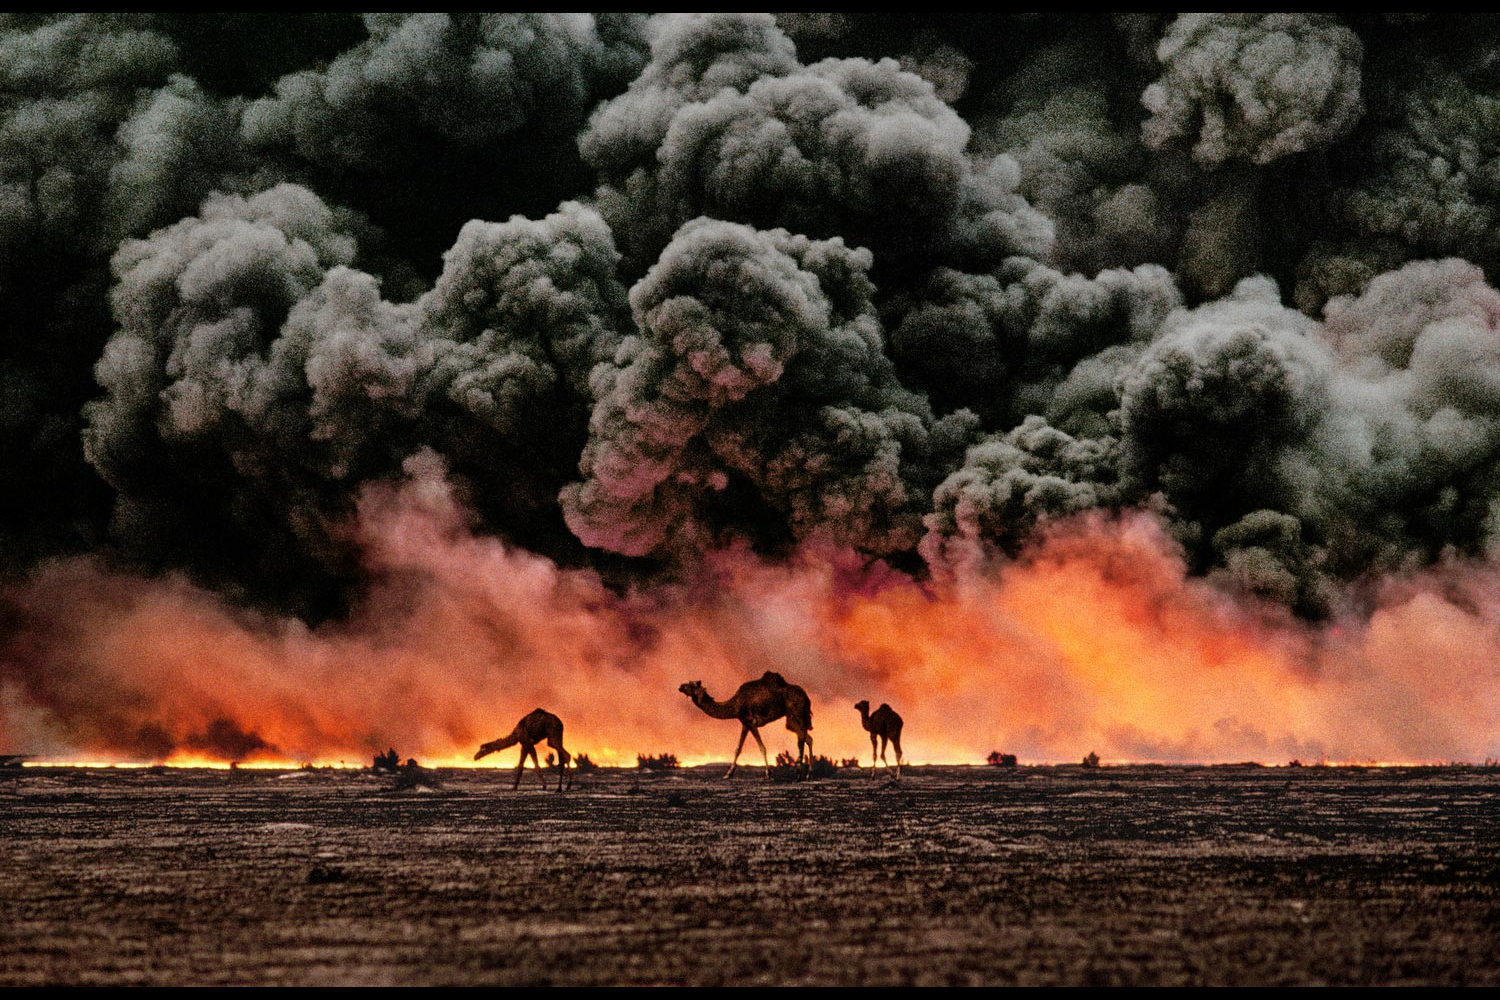 Struggling camels silhouetted against the oil-fire, al-Ahmadi oil field, Kuwait, 1991
                              
                              
                              ‘The darkness caused by the burning oil wells was like a moonless night. The exposure on my camera was about a quarter of a second on f2.8.’ The photographs show a scorched, infernal place, ‘but they don’t convey the fine mist of oil that hung in the air and coated my cameras, or the deafening roar of the burning wells. Nor do they show the unexploded bombs and mines that dotted the desert. I’ll never forget the moment I got out of the car to stretch my legs and caught a glimpse of an allied lawn-dart mine behind the vehicle with our tire tracks running right over it!’